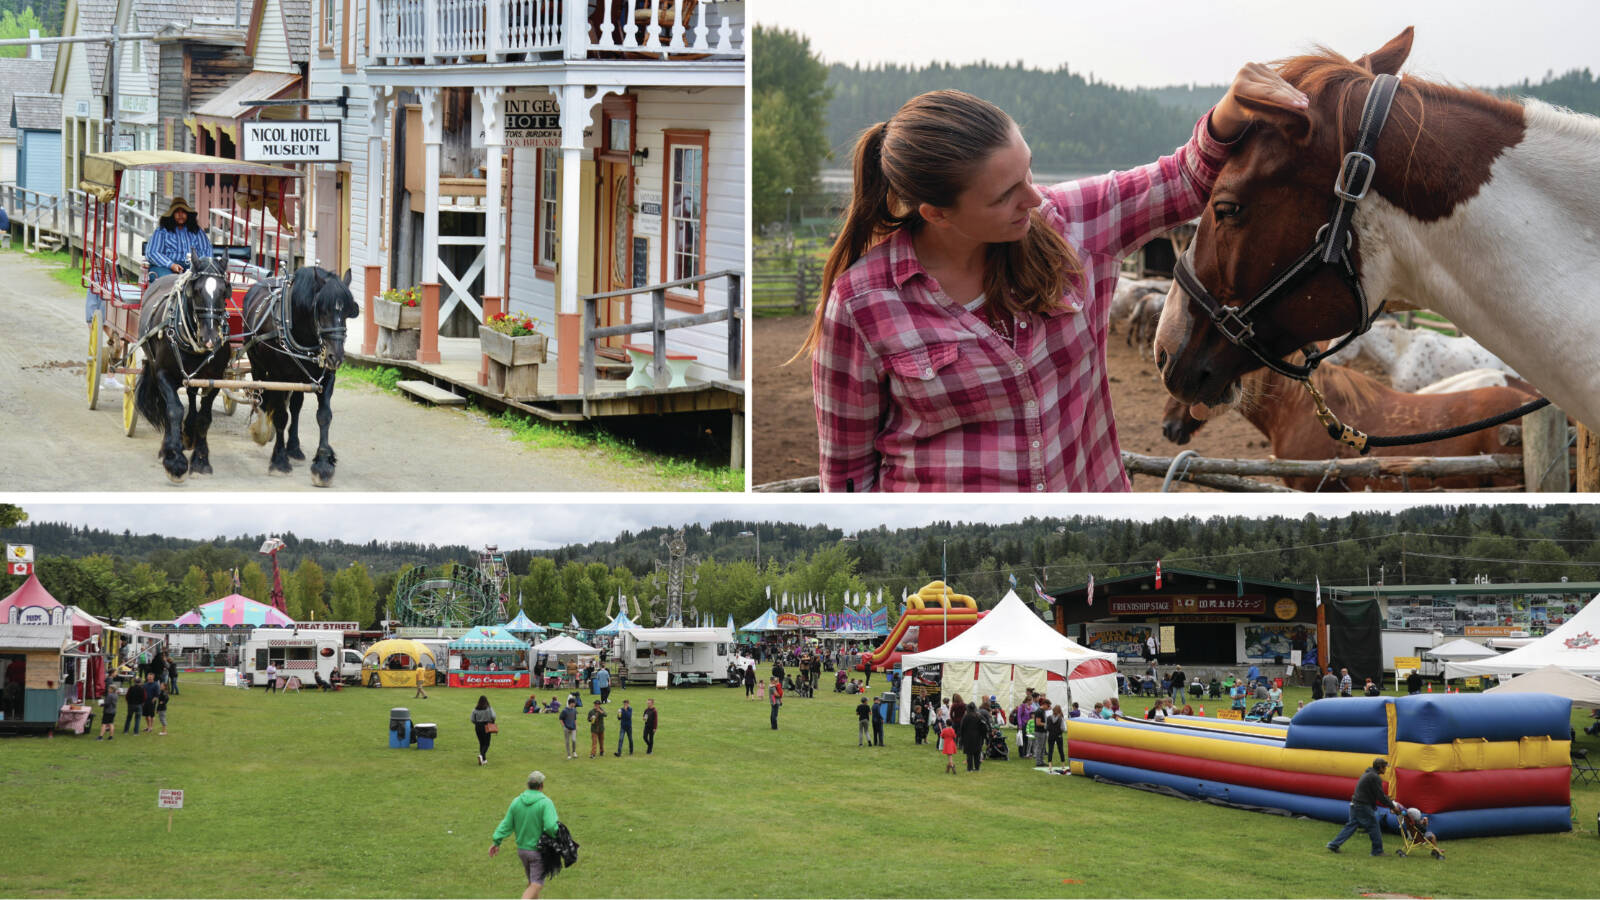 From special events at Barkerville, to the stampede and rodeos, to community festivals like Billy Barker Days, summer offers plenty to see and do in the Cariboo!